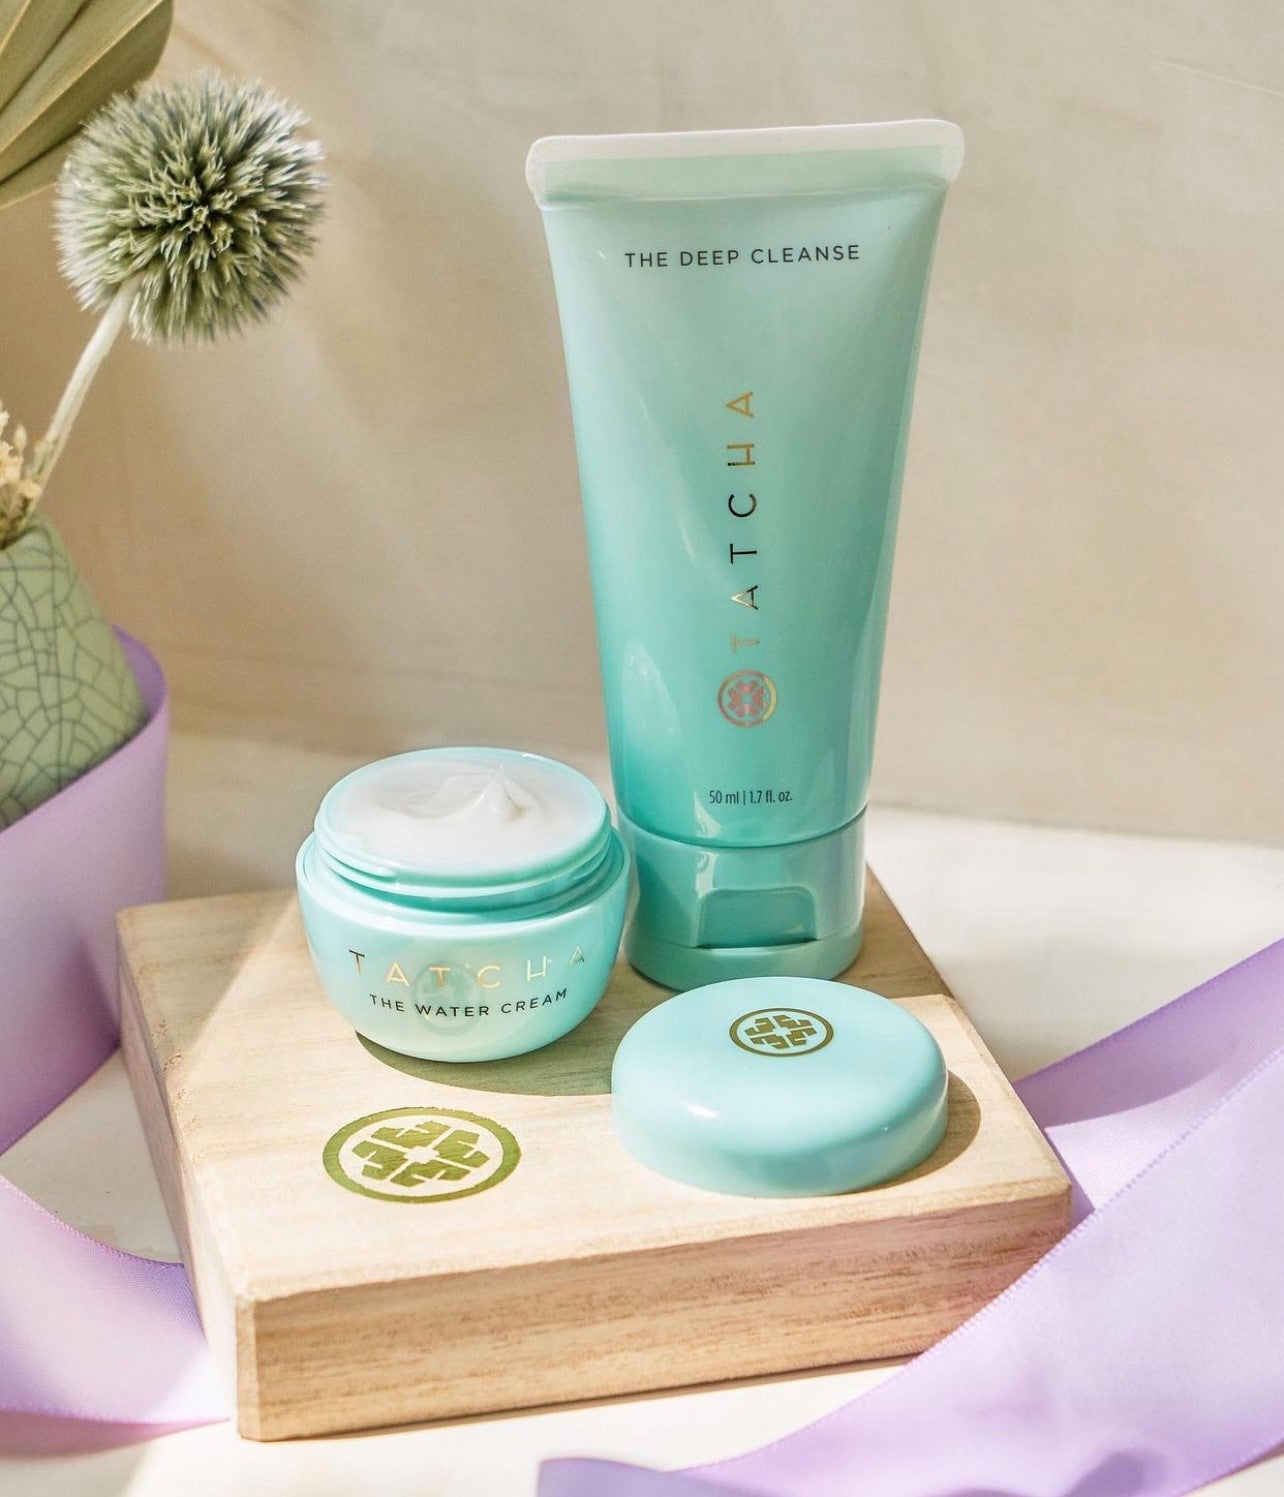 tatcha cream and cleanser available at sephora